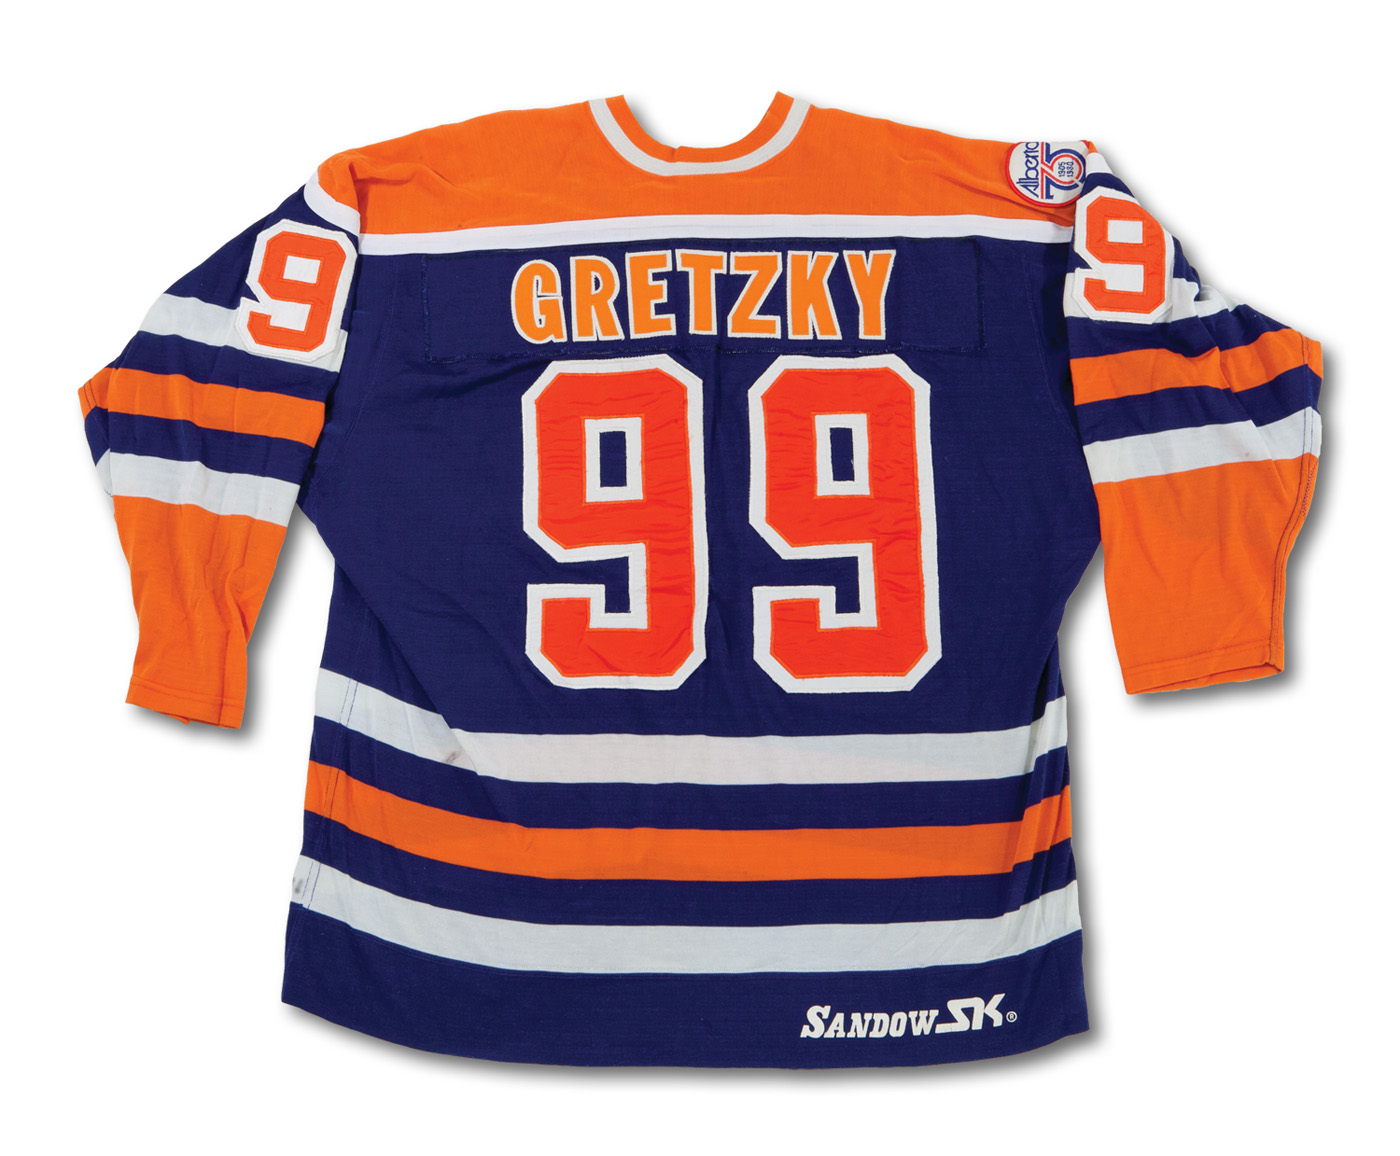 Gretzky Oilers Jersey 